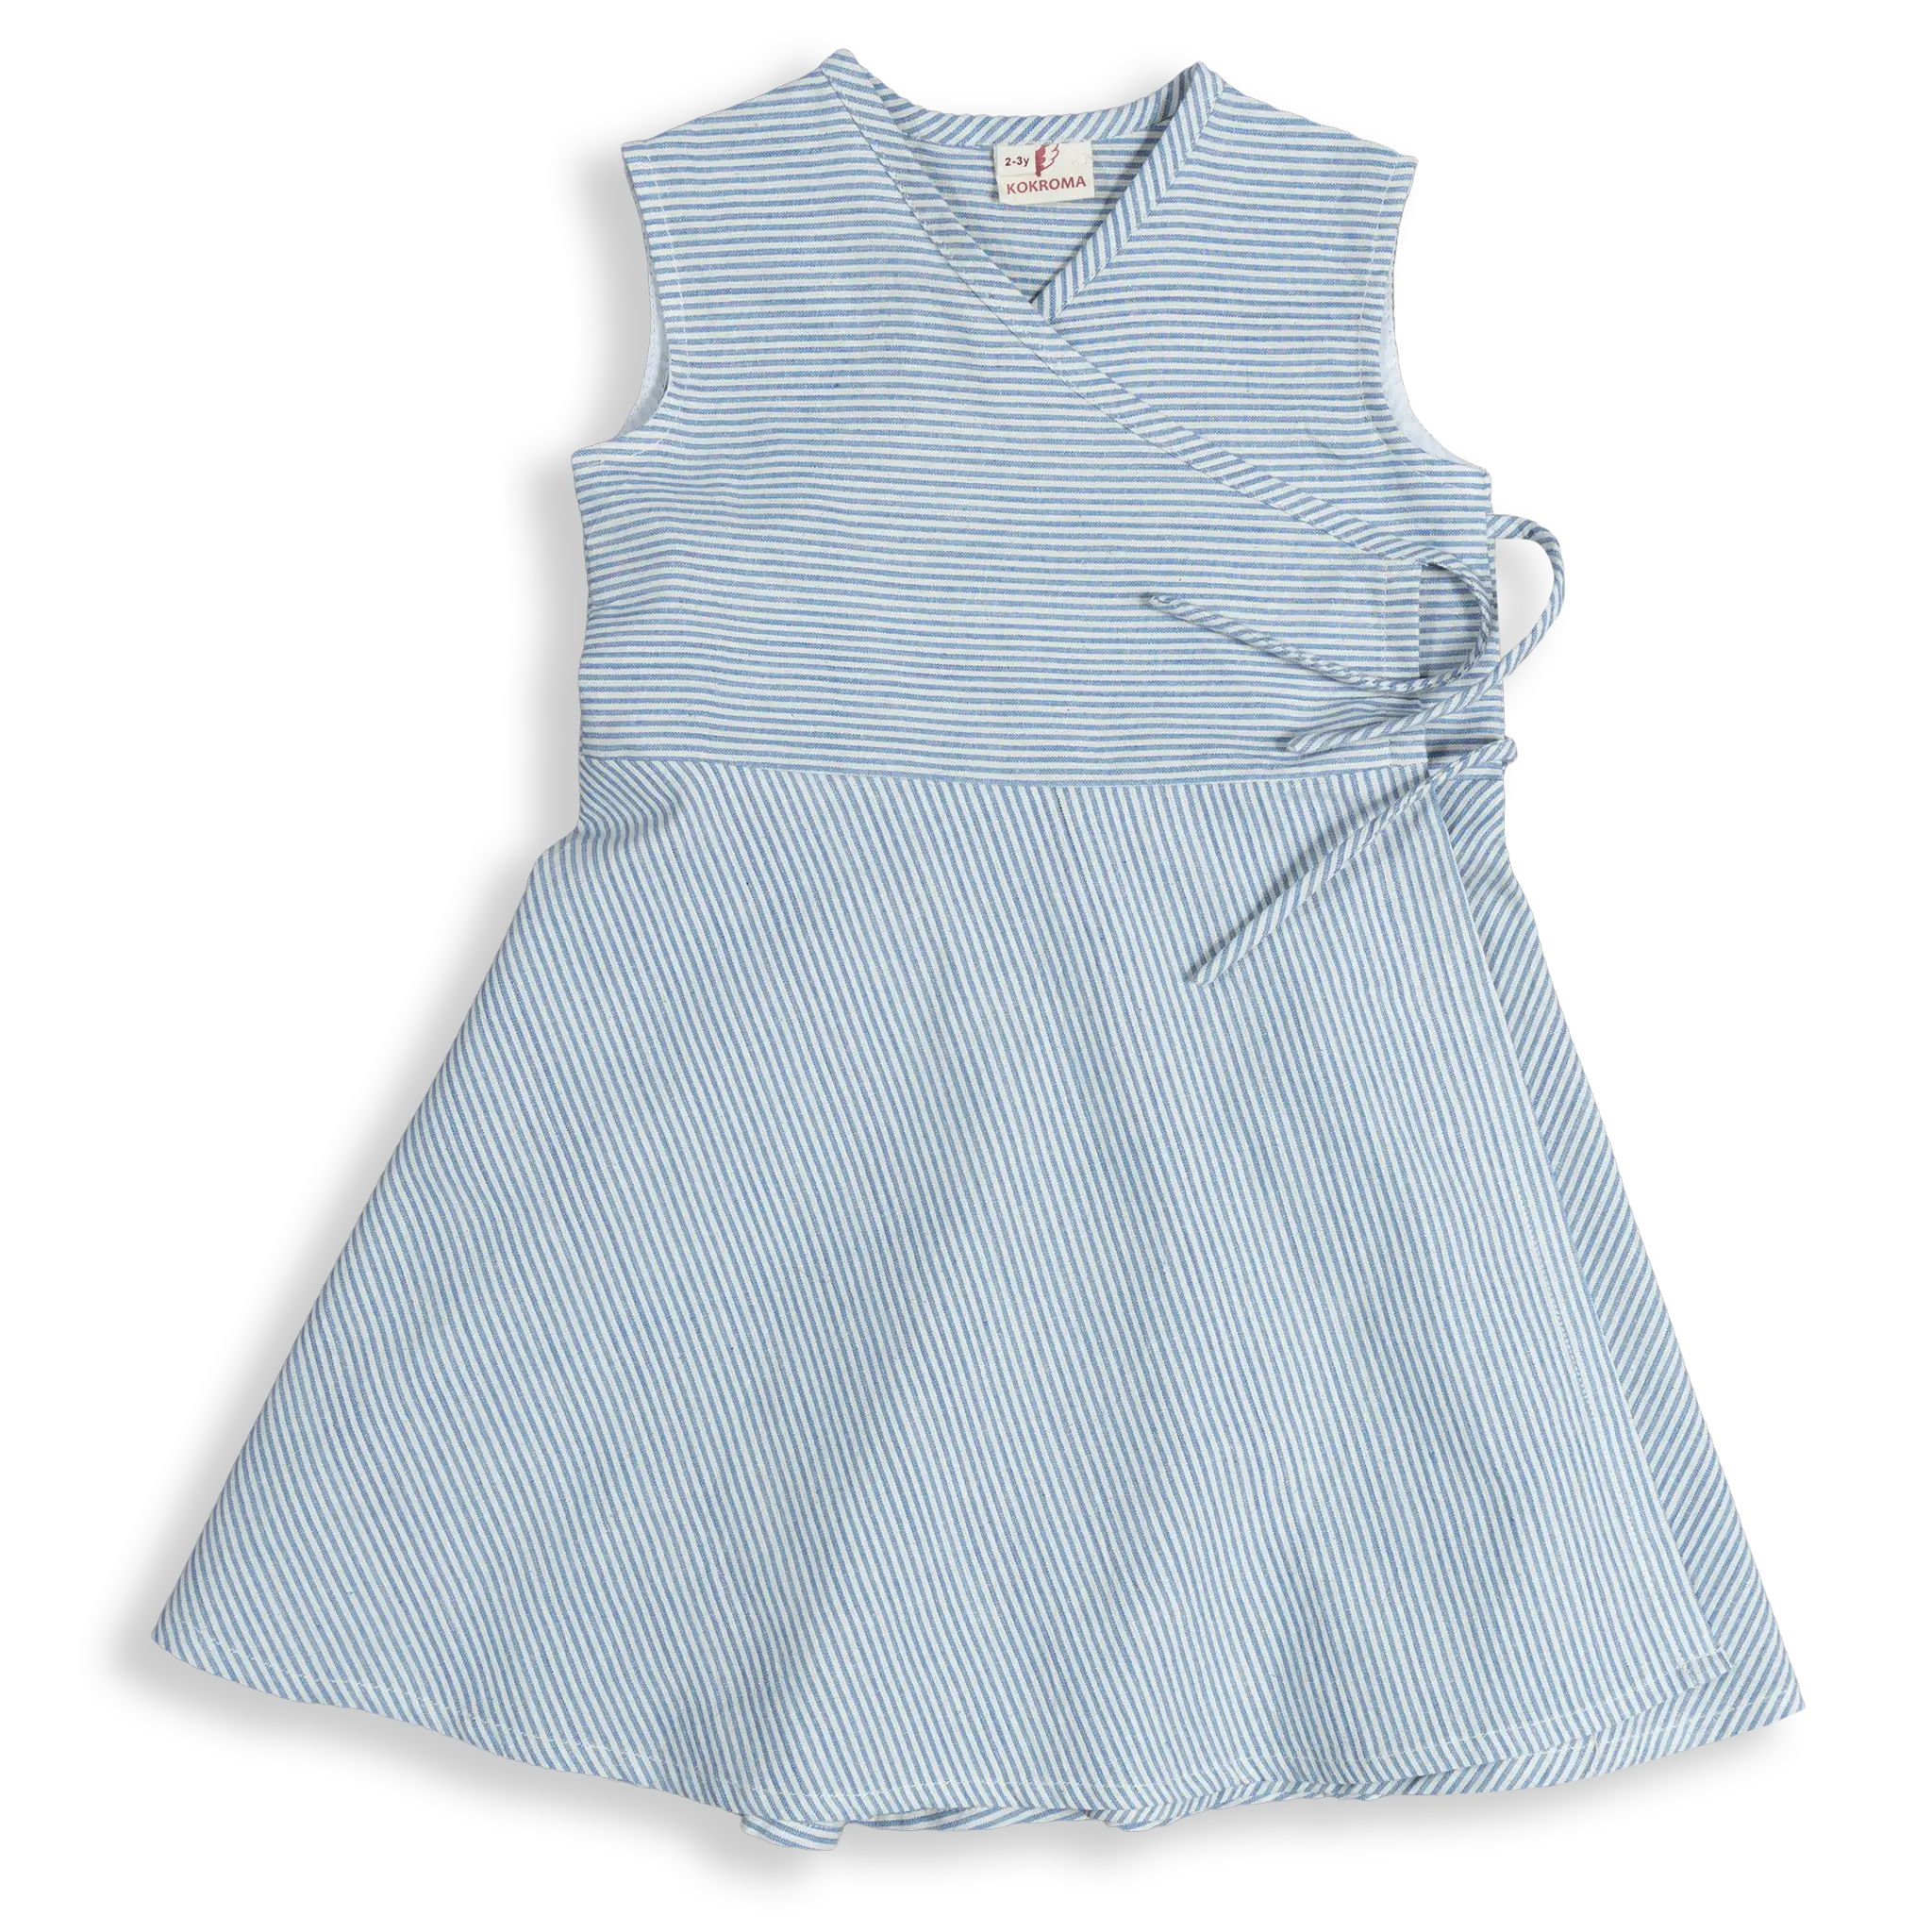 This Wrap Dress is all year round ready! Tastefully wrap up any look with an adjustable fit that'll grow with your child. Perfect for winter, layer it up with a high neck sweater underneath for a super snuggly ensemble. It's quite the wrap star!